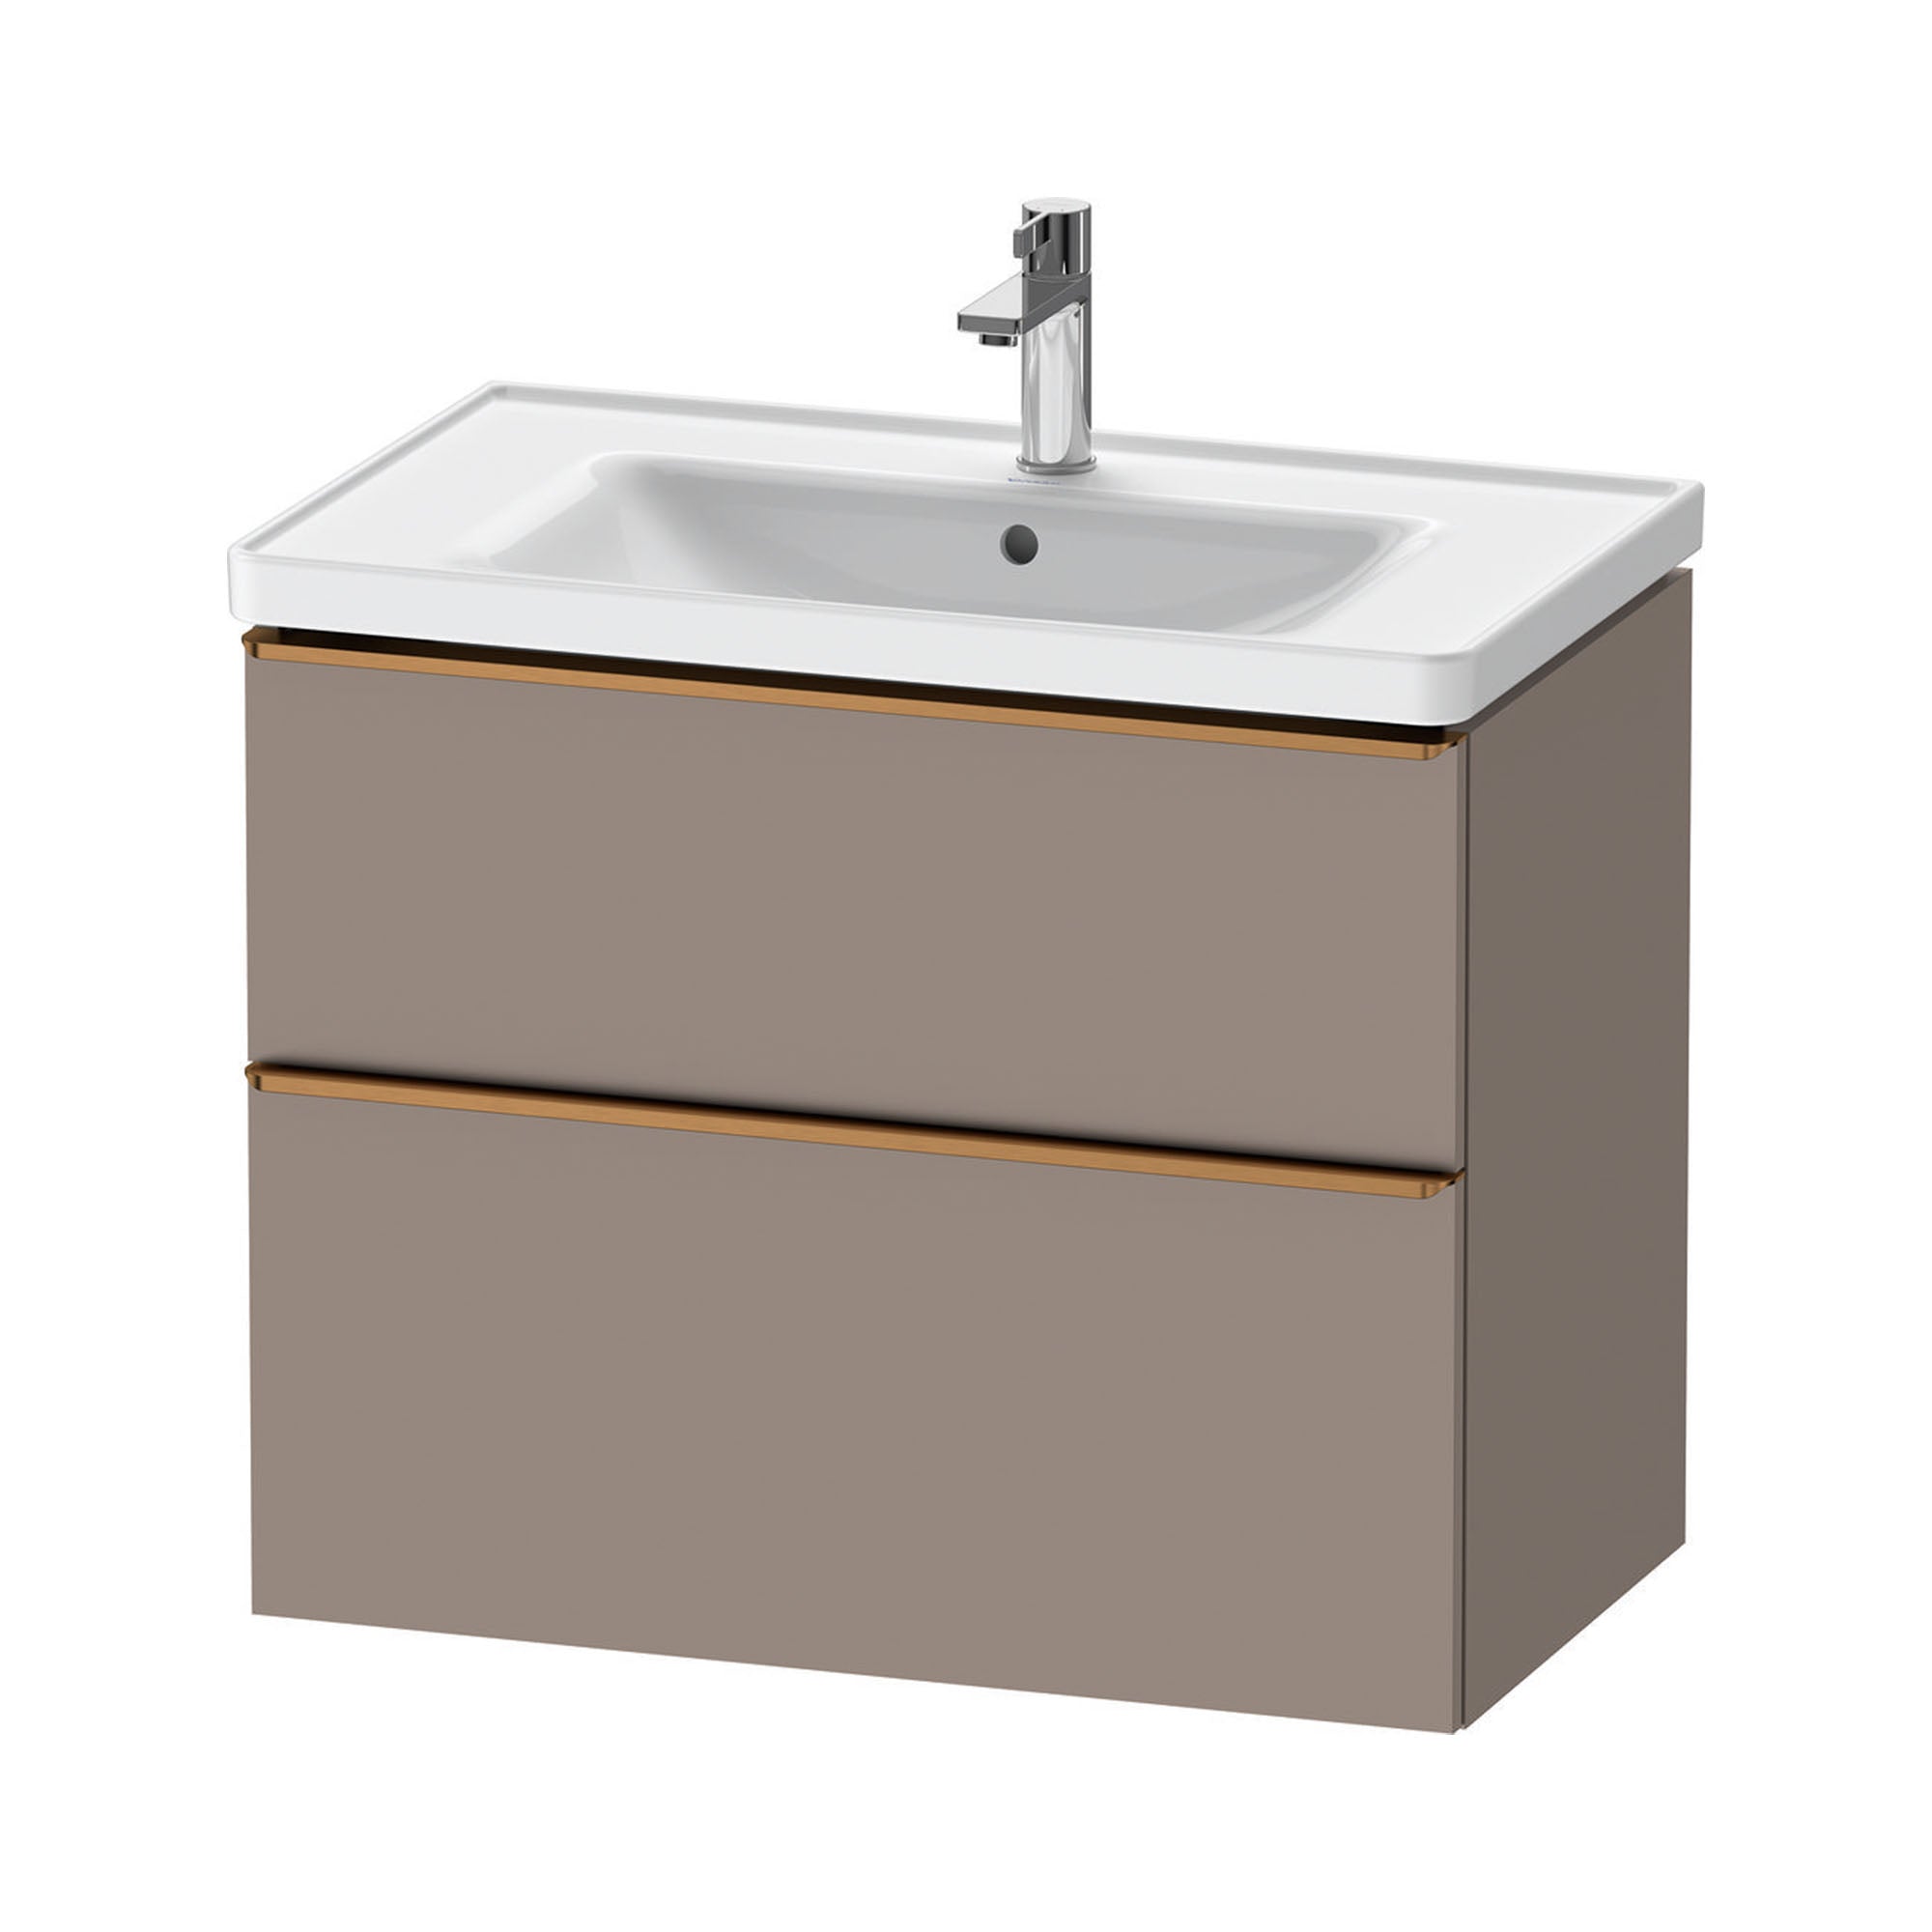 duravit d-neo 800mm wall mounted vanity unit with d-neo basin basalt brushed bronze handles